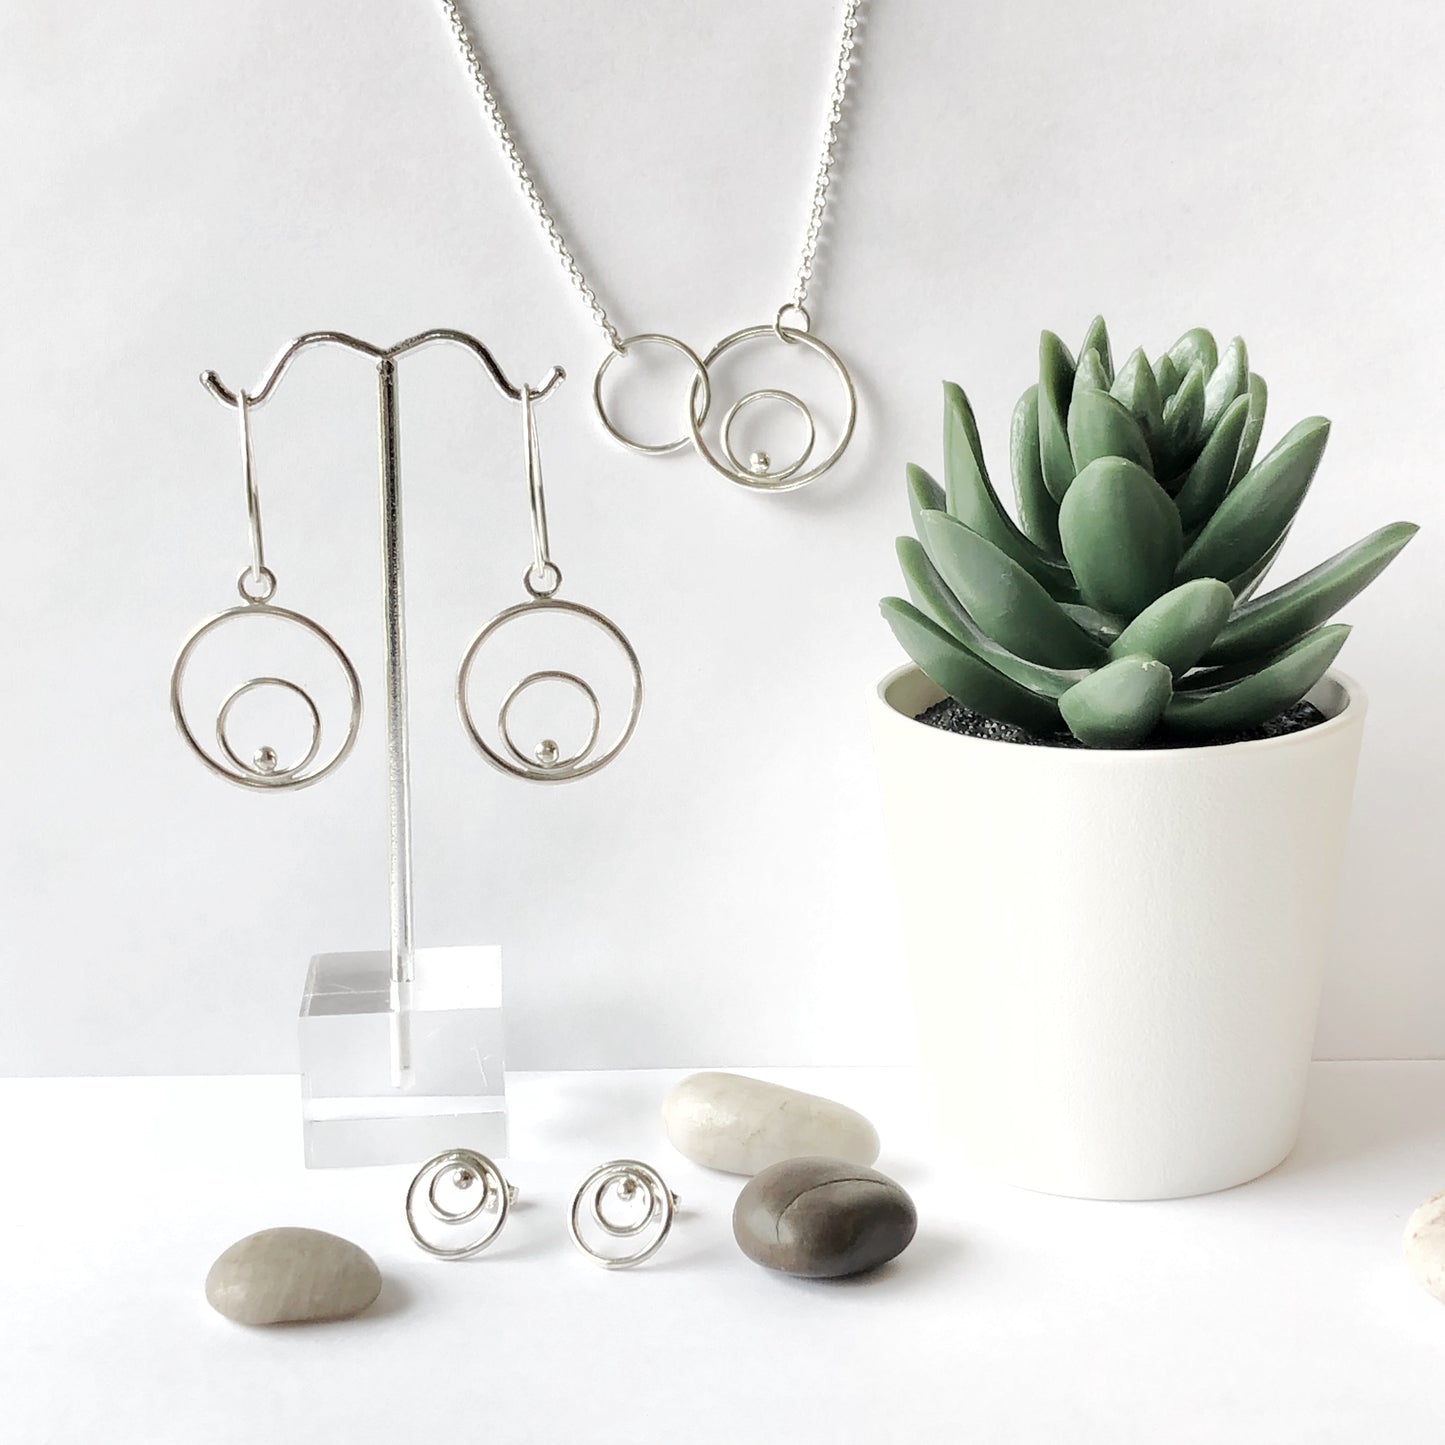 Silver double circle earrings with coordinating necklace